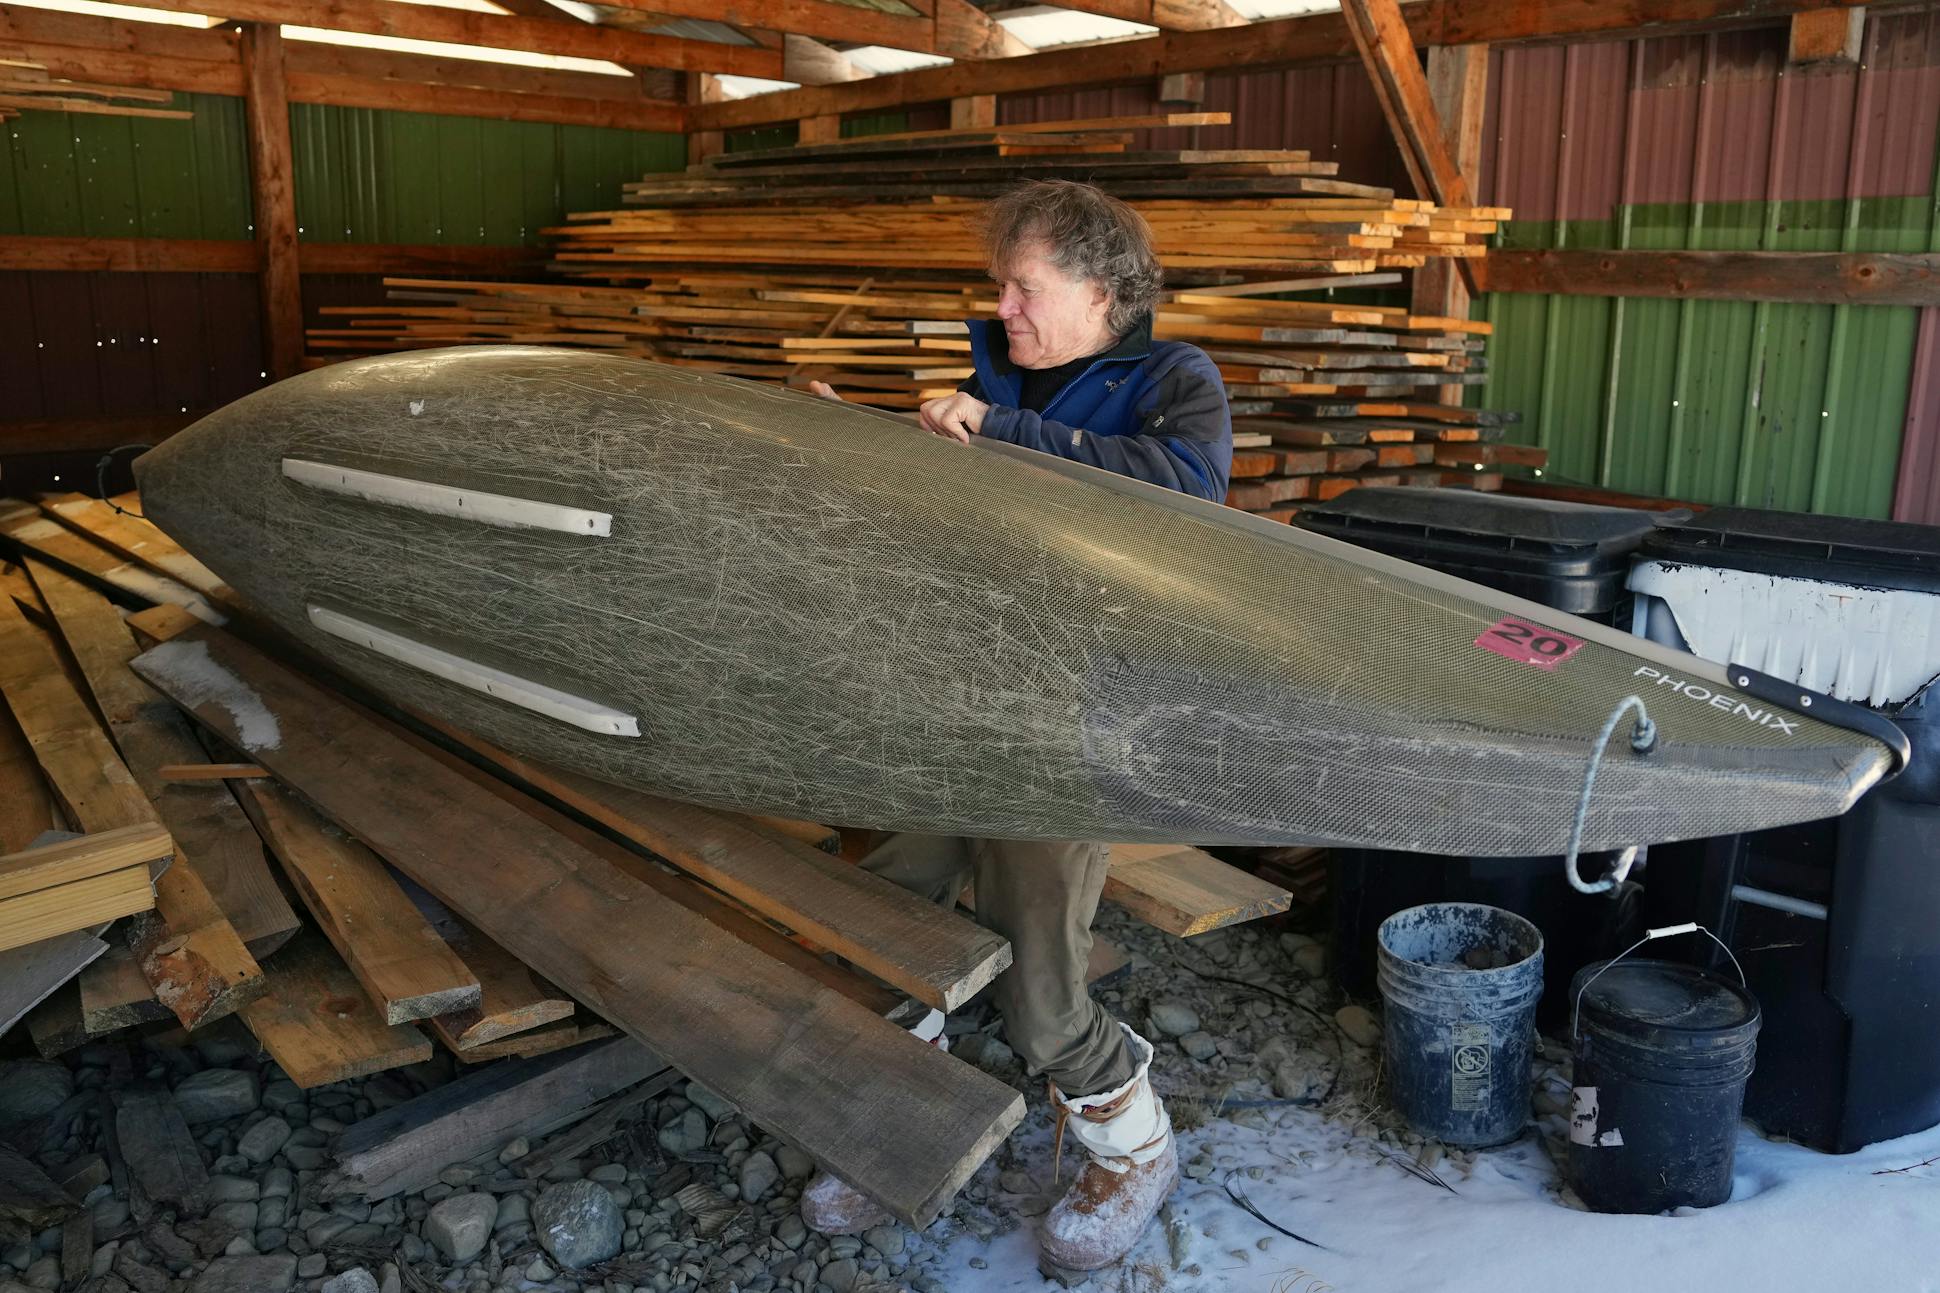 A heavily modified Northstar Phoenix canoe sled has been a go-to for many solo expeditions. This year, he'll rely heavily on a lightweight Alpacka raft.